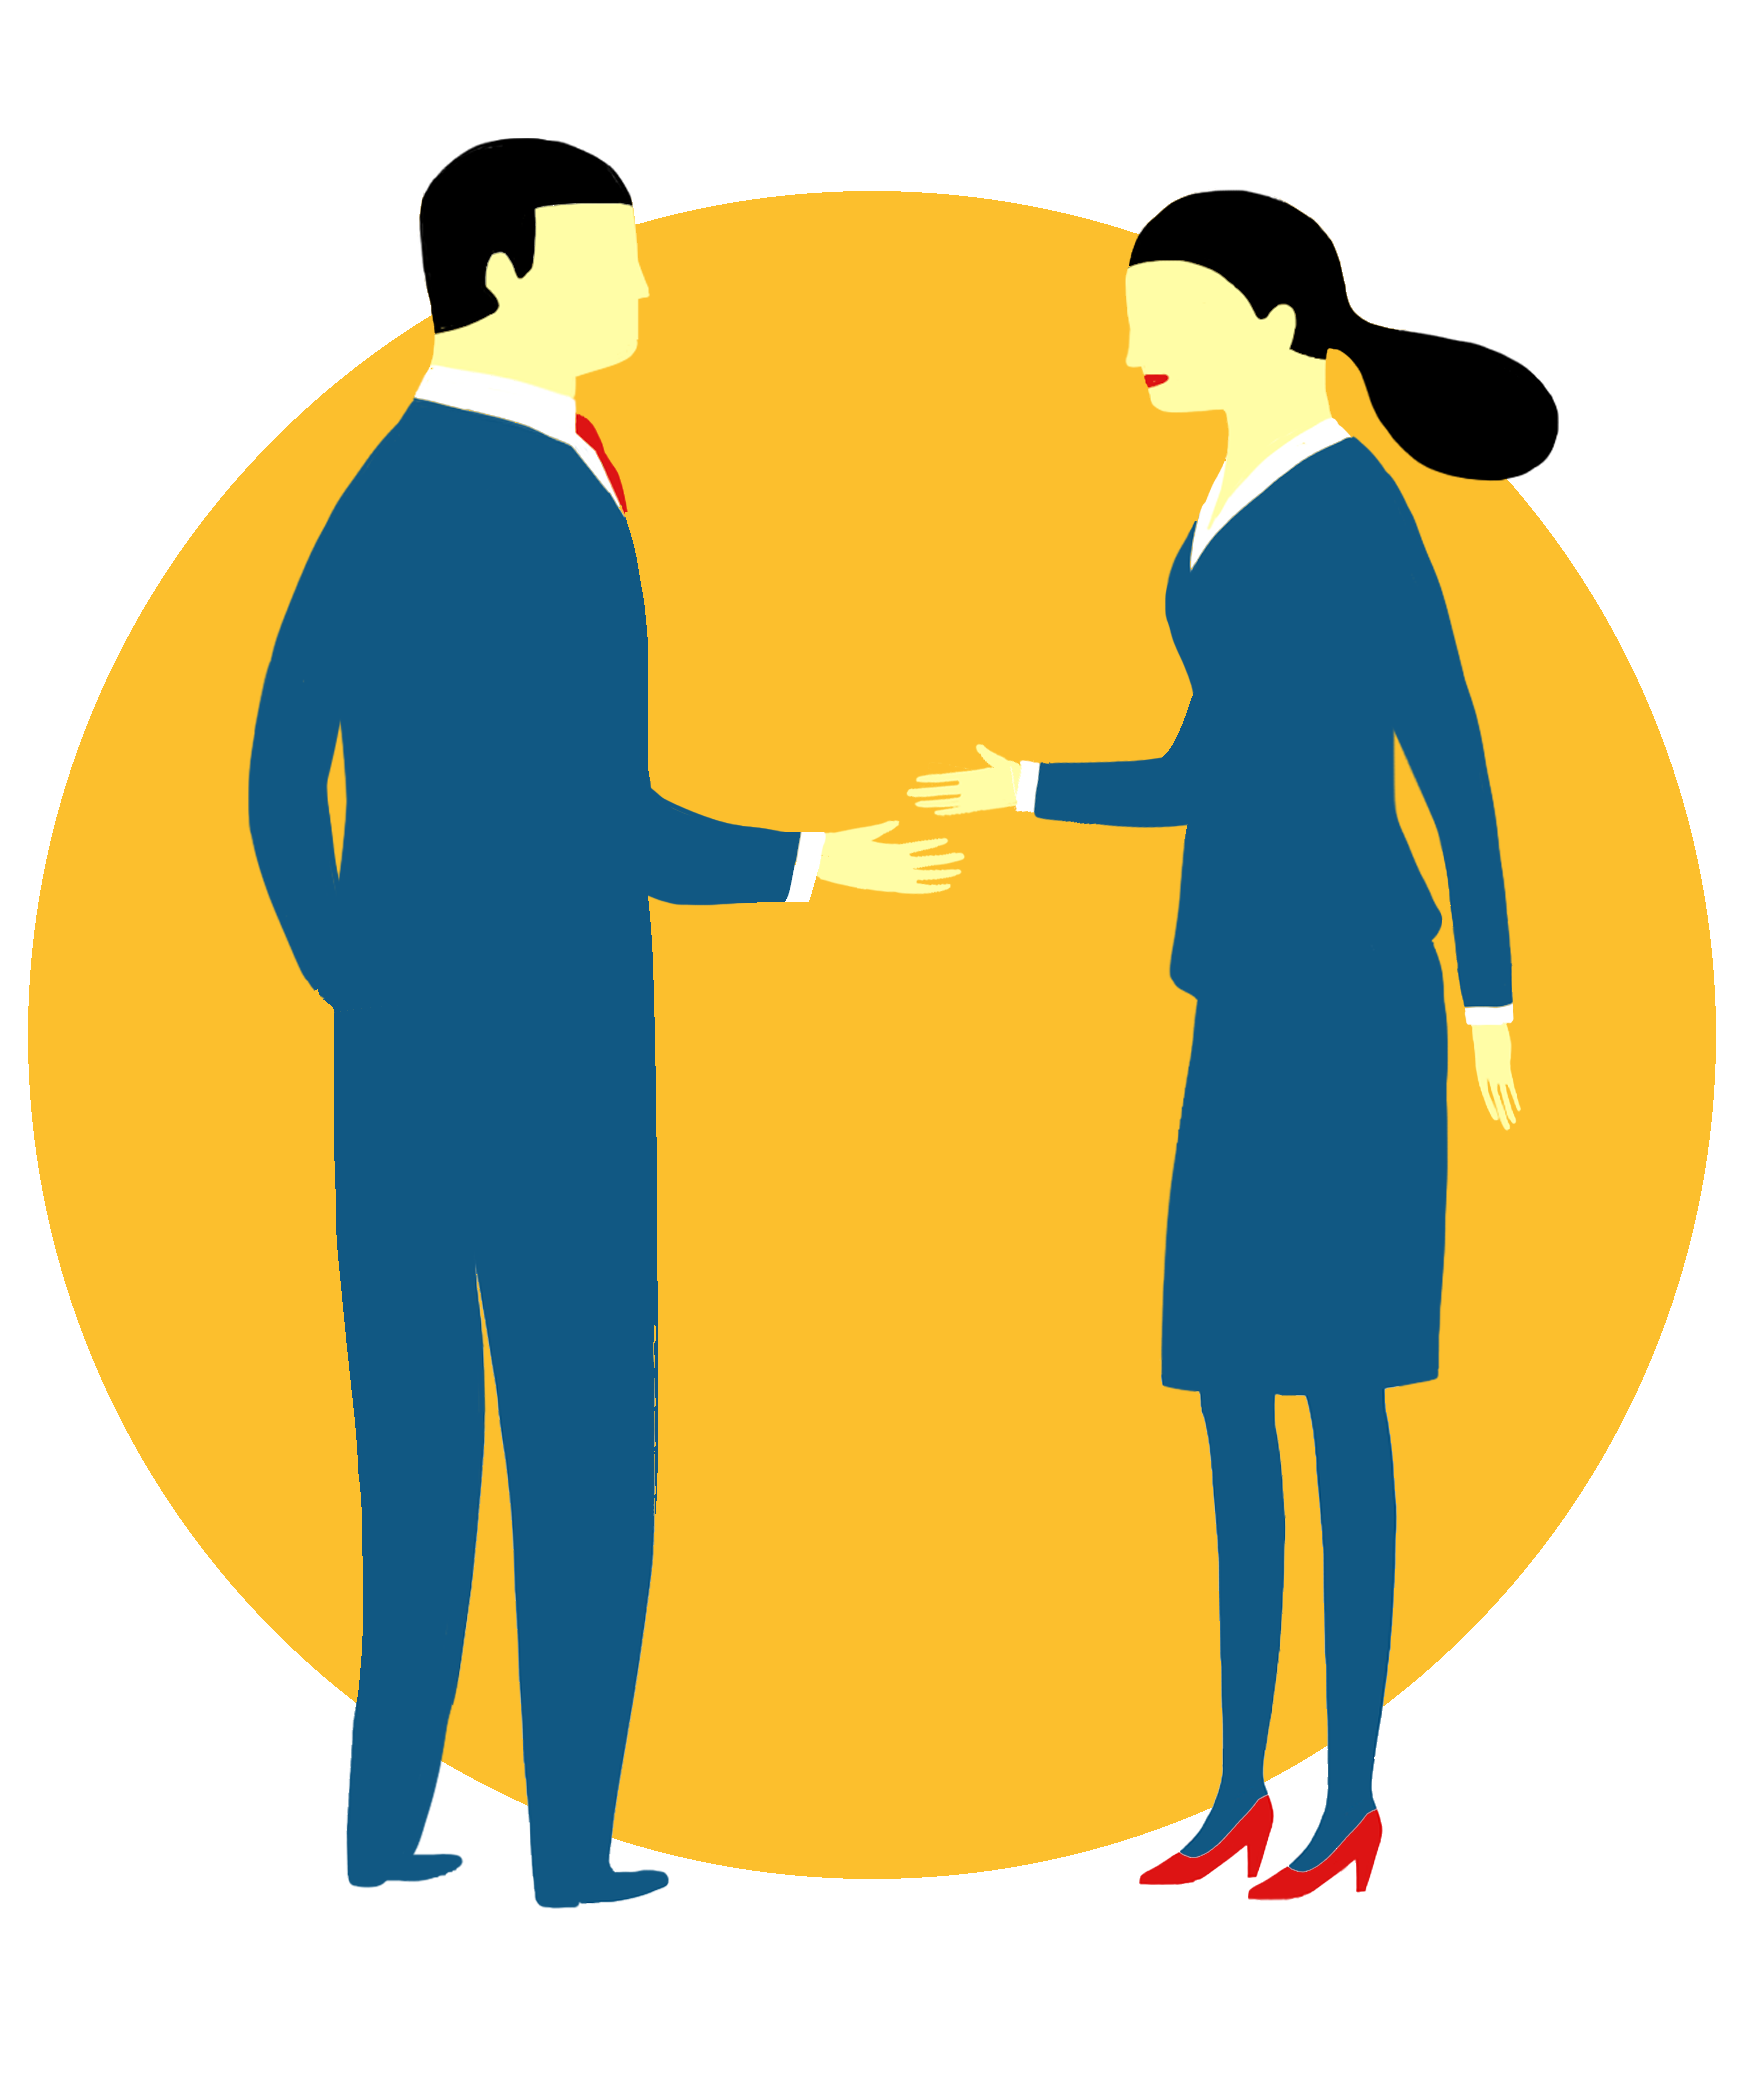 Professional clipart business partner. Career value partners icon